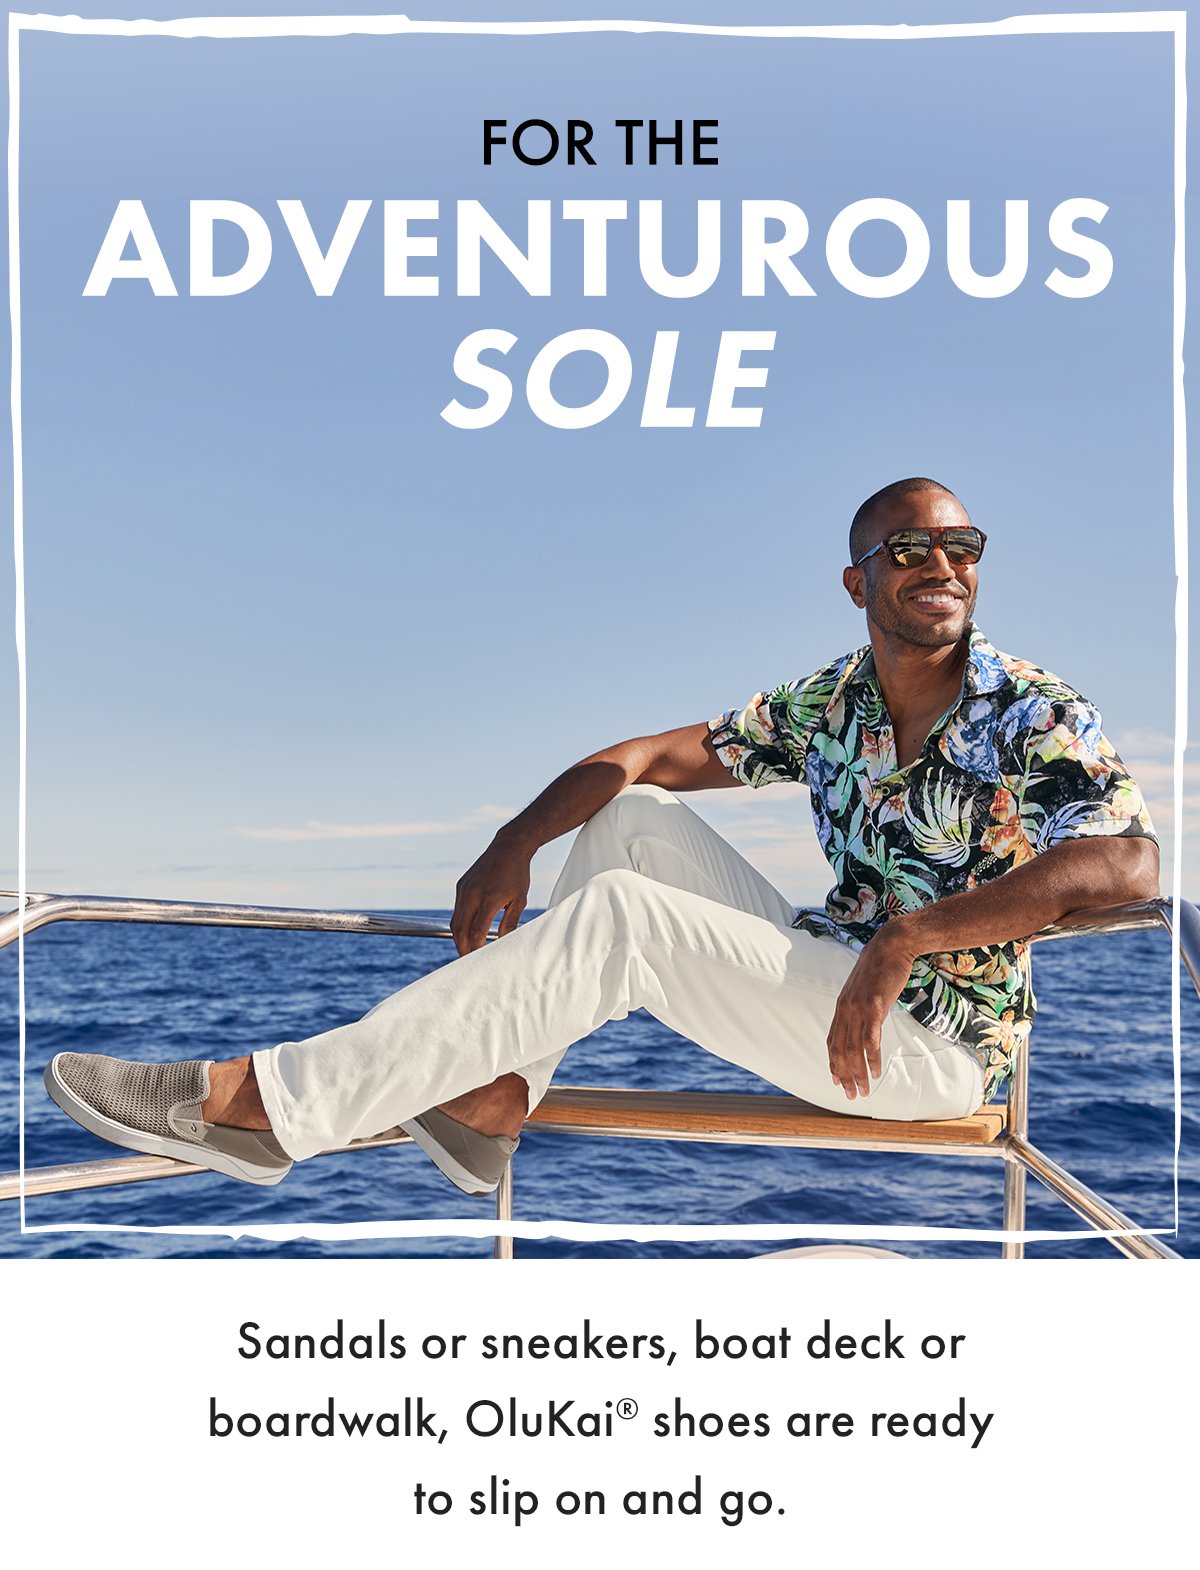 For the adventurous sole. Sandals or sneakers, boat deck or boardwalk, OluKai shoes are ready to slip on and go.